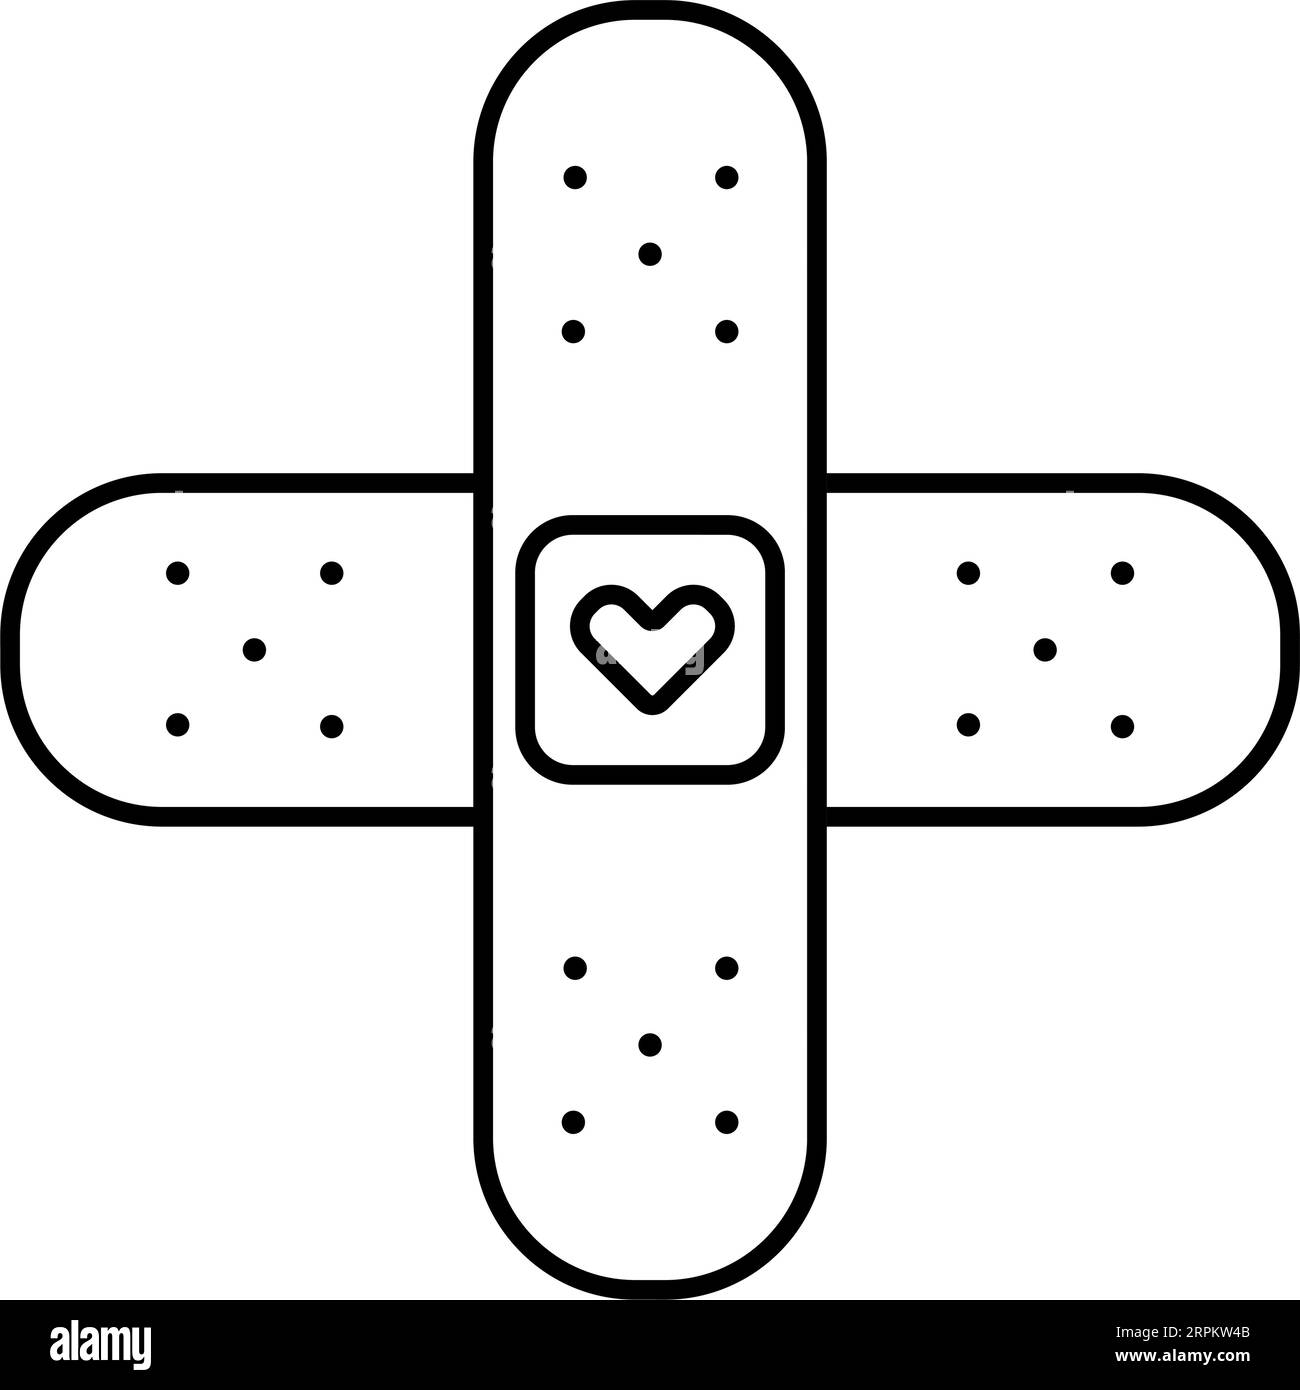 Medical cute illustration of band aid with a heart in outline style. Medical bandage plaster line icon. . Stock Vector